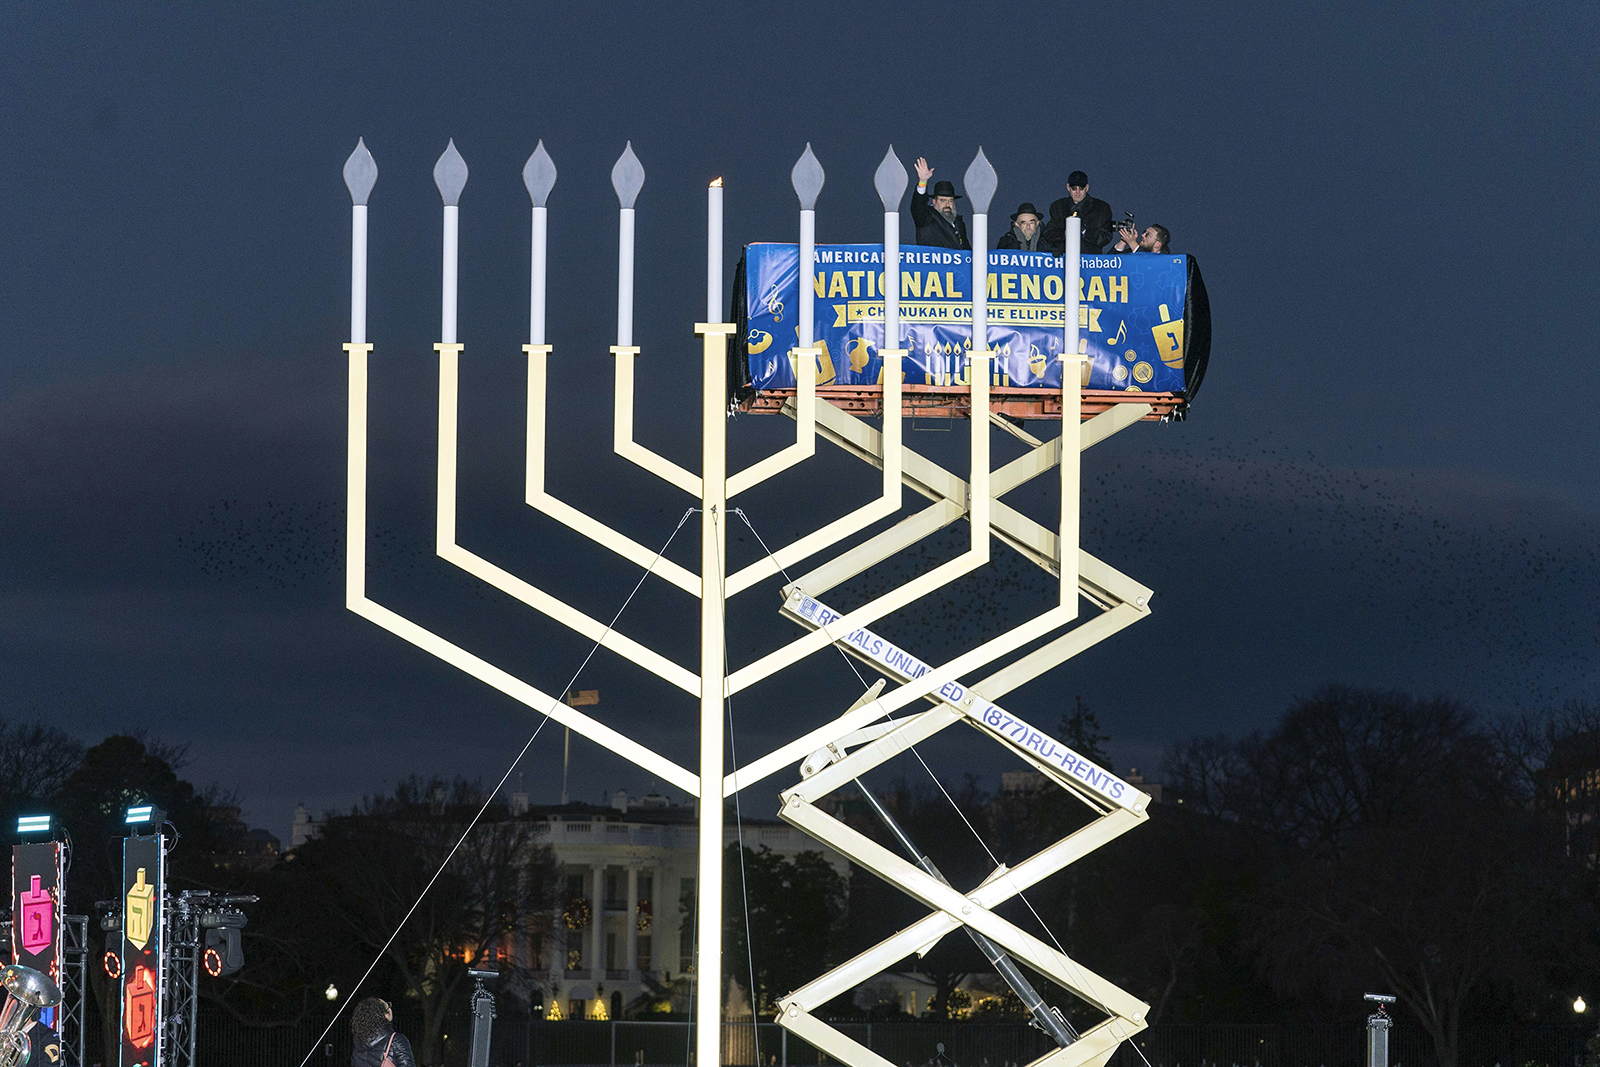 Giant menorahs, helicopters, candy cannons announce the arrival of Hanukkah